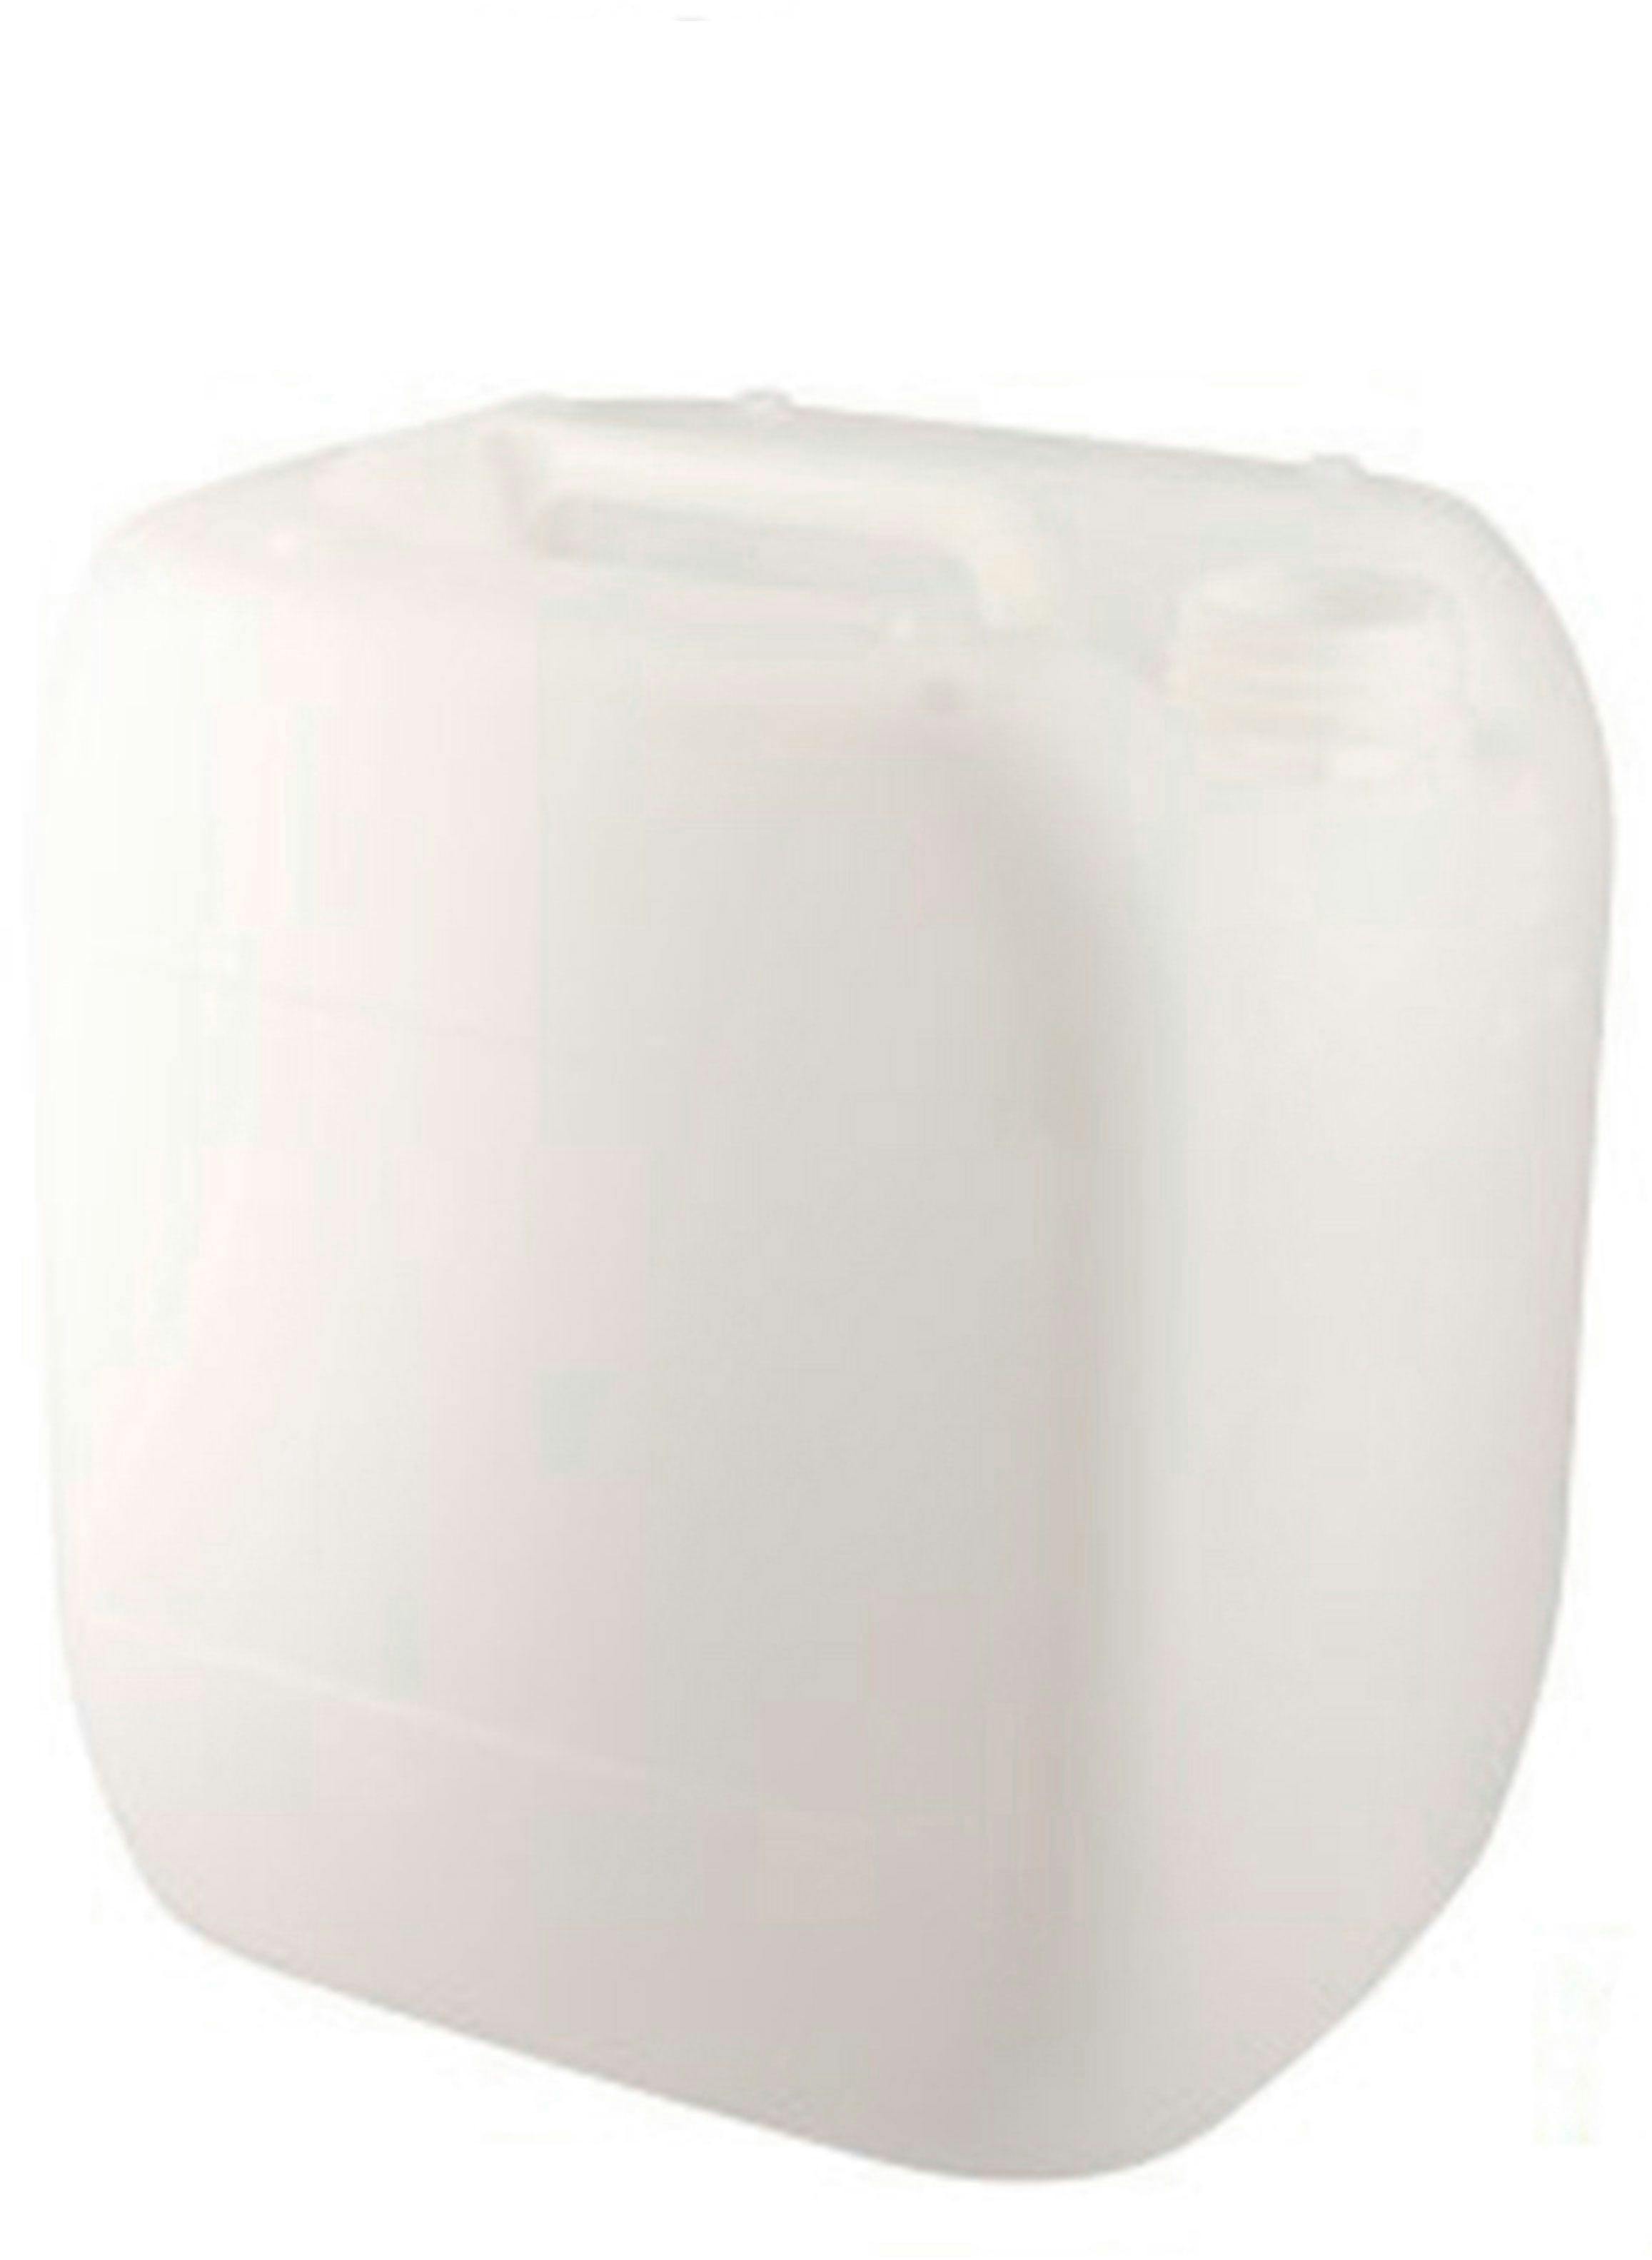 Jerrican stackable HDPE 16 liters natural approved J-CAP40 D61